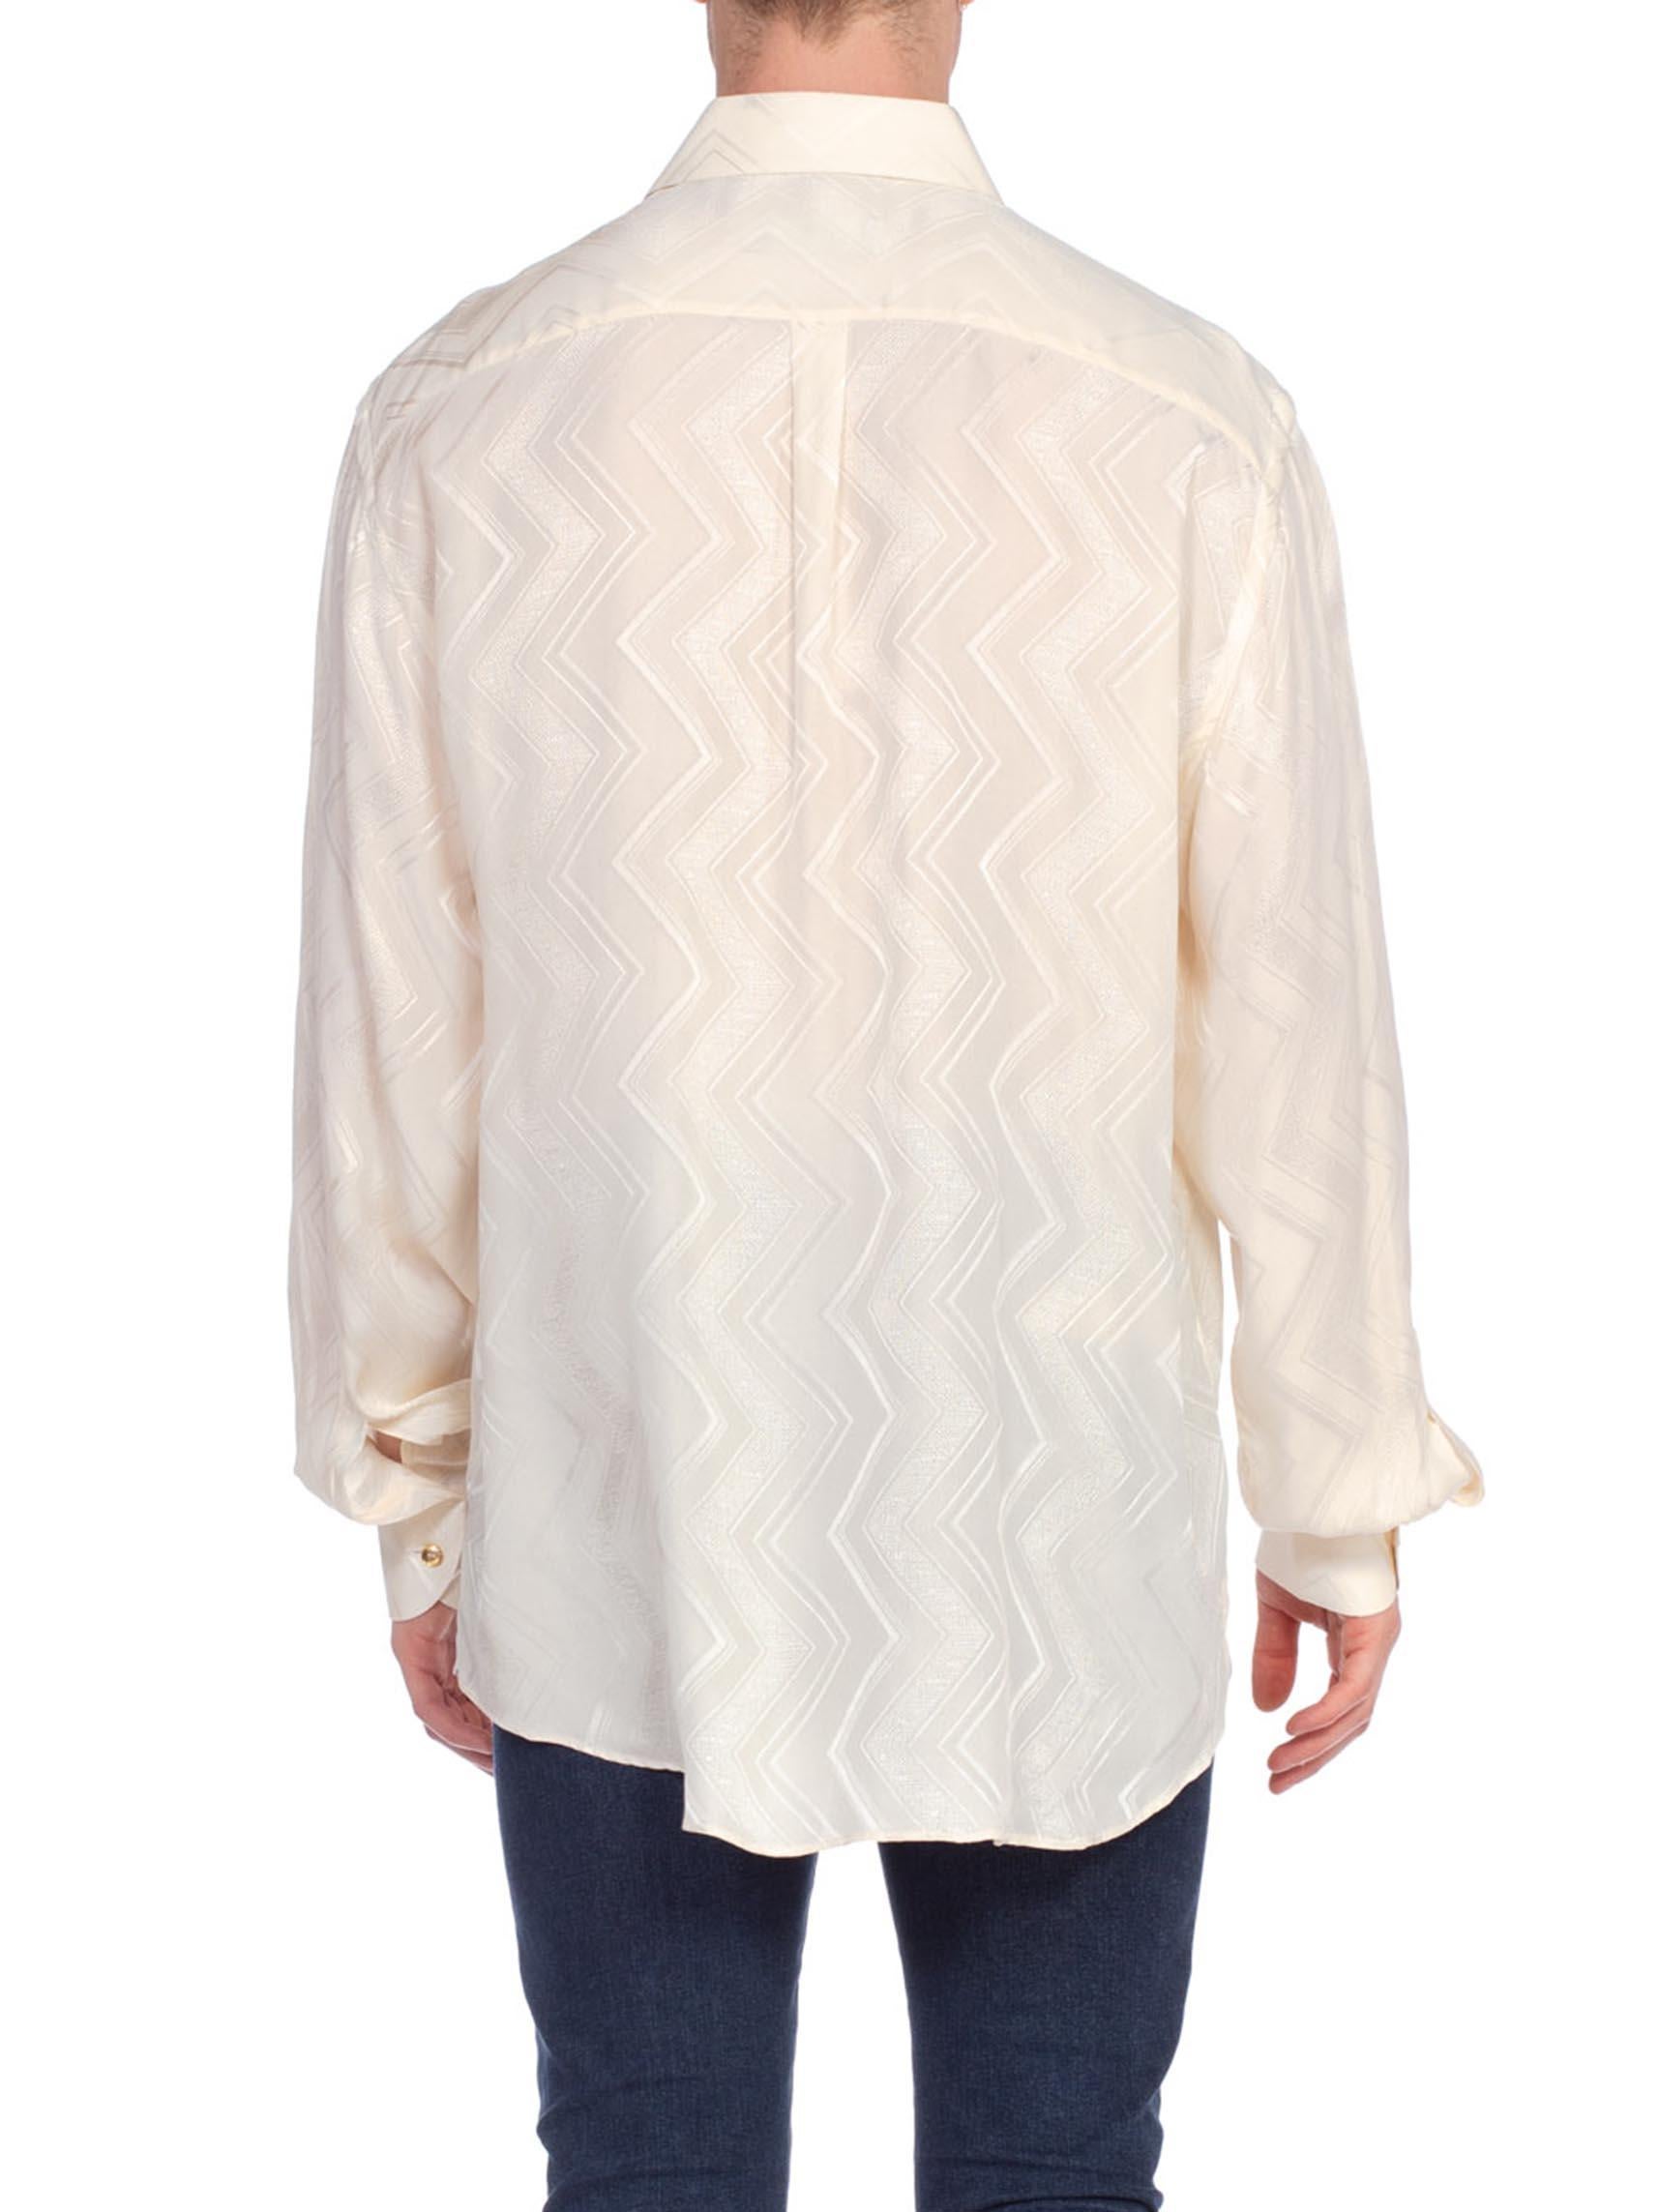 1970'S Cream Silk Jacquard Men's Disco Shirt From Beverly Hills, Made In Italy 5